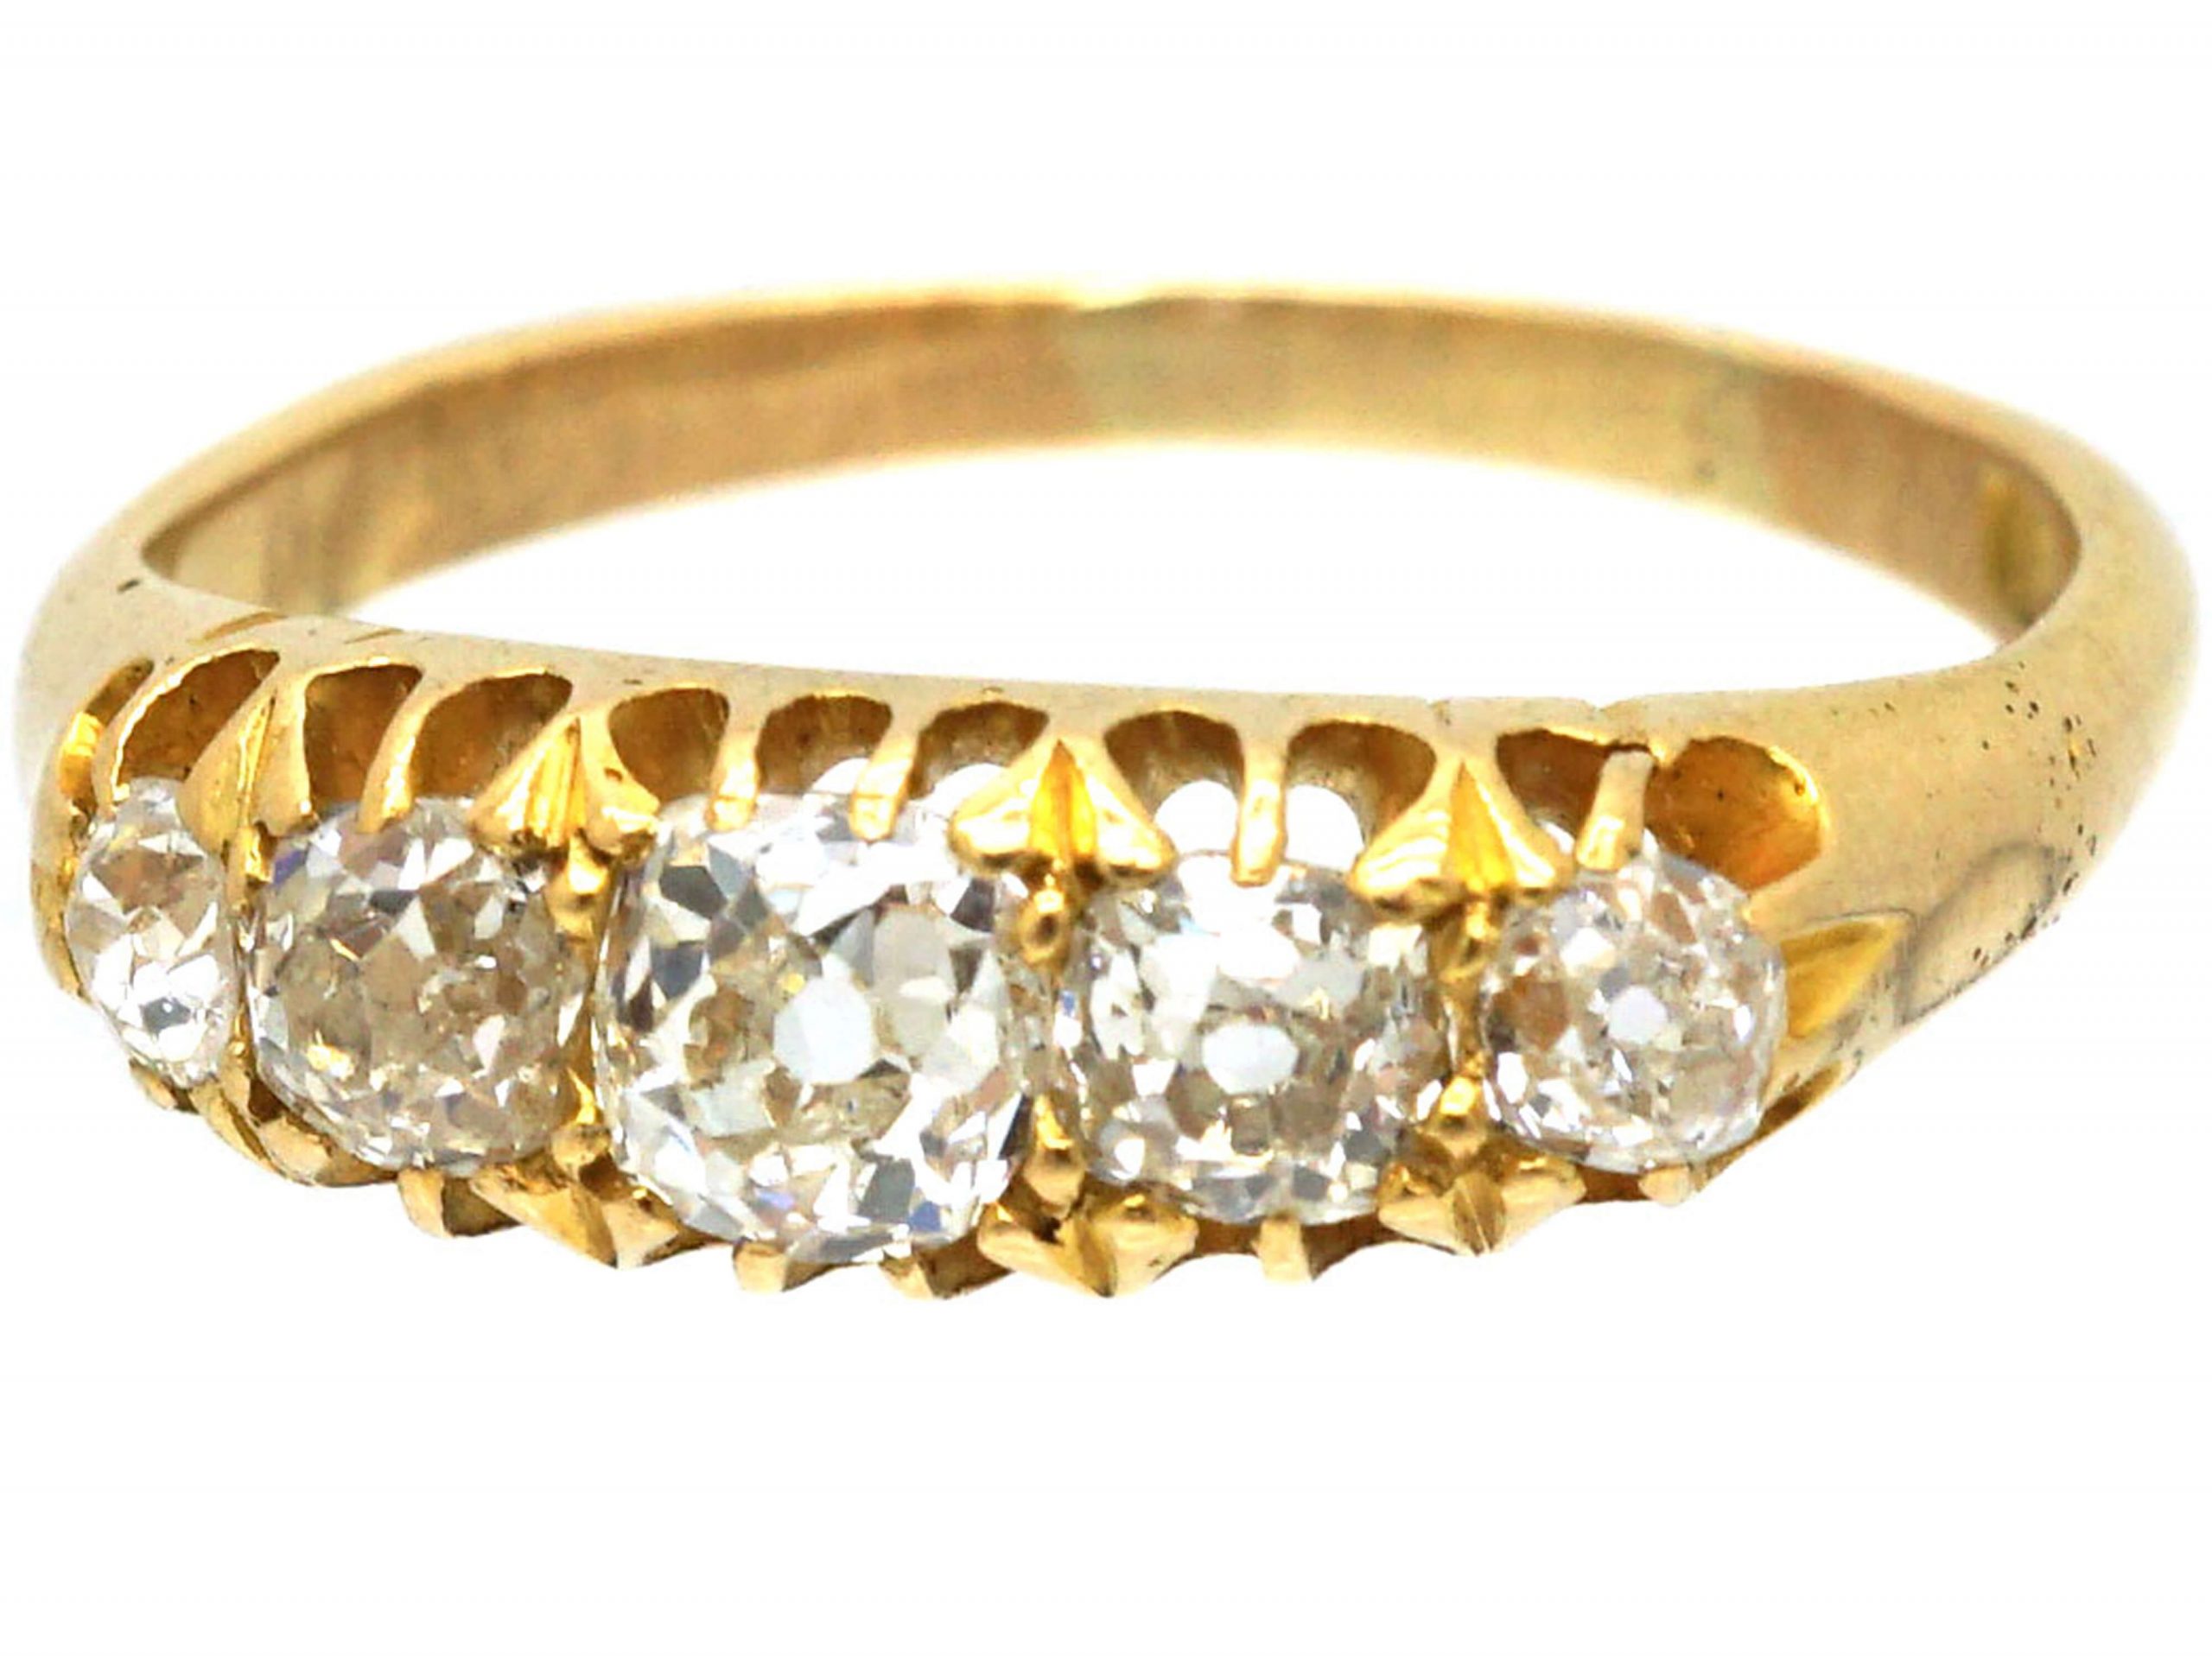 Edwardian 18ct Gold, Five Stone Diamond Ring (424S) | The Antique ...